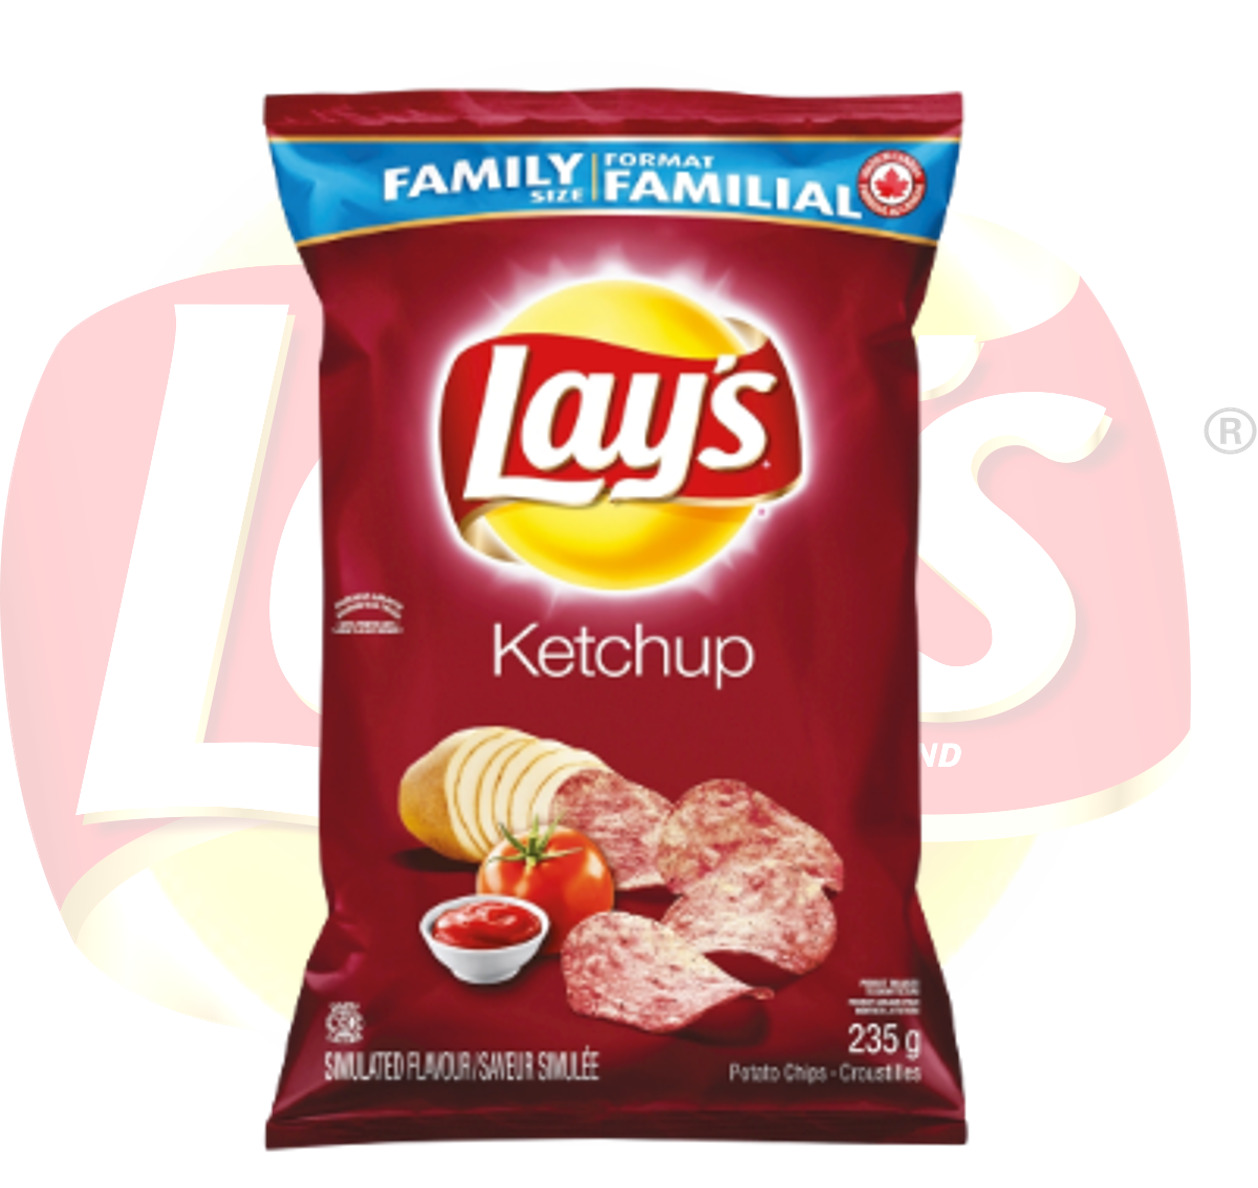 4 Bags! Canadian Lays Ketchup Chips Family Size (235g)